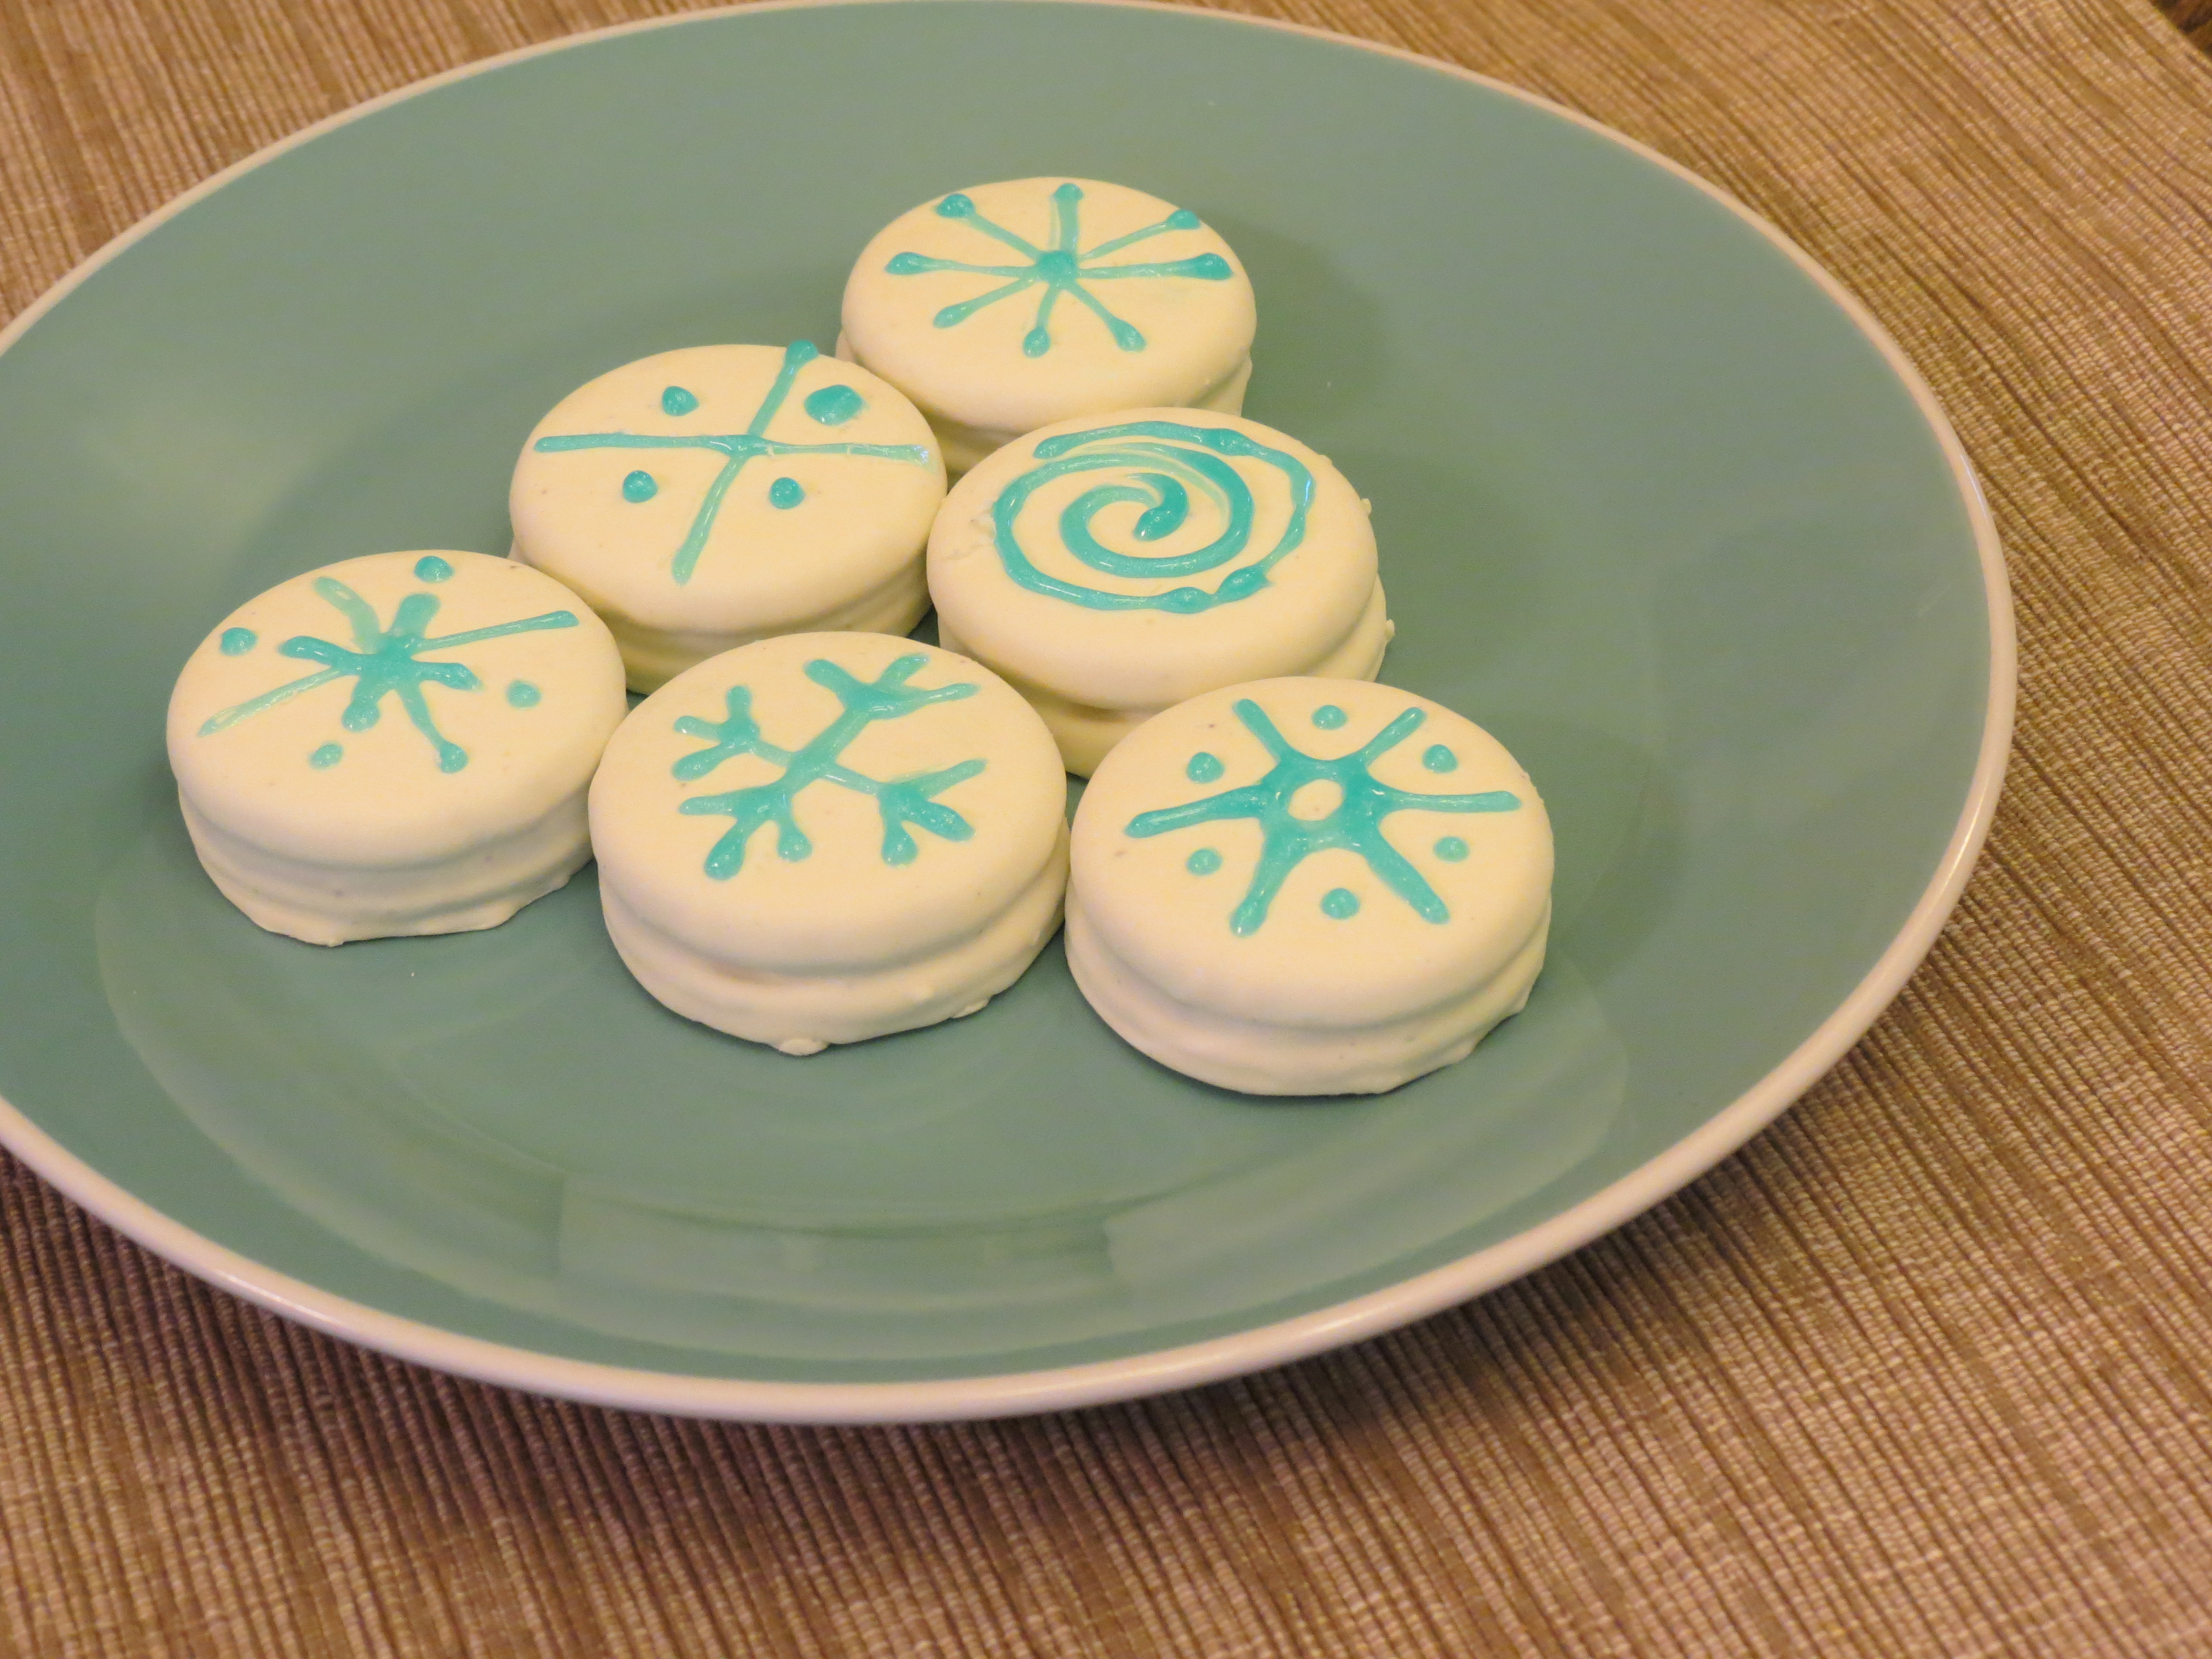 Looking for a fun snow day activity to do with the kids? Kids will love making these snowflake cookies. Avoid snow day blues with a delicious distraction